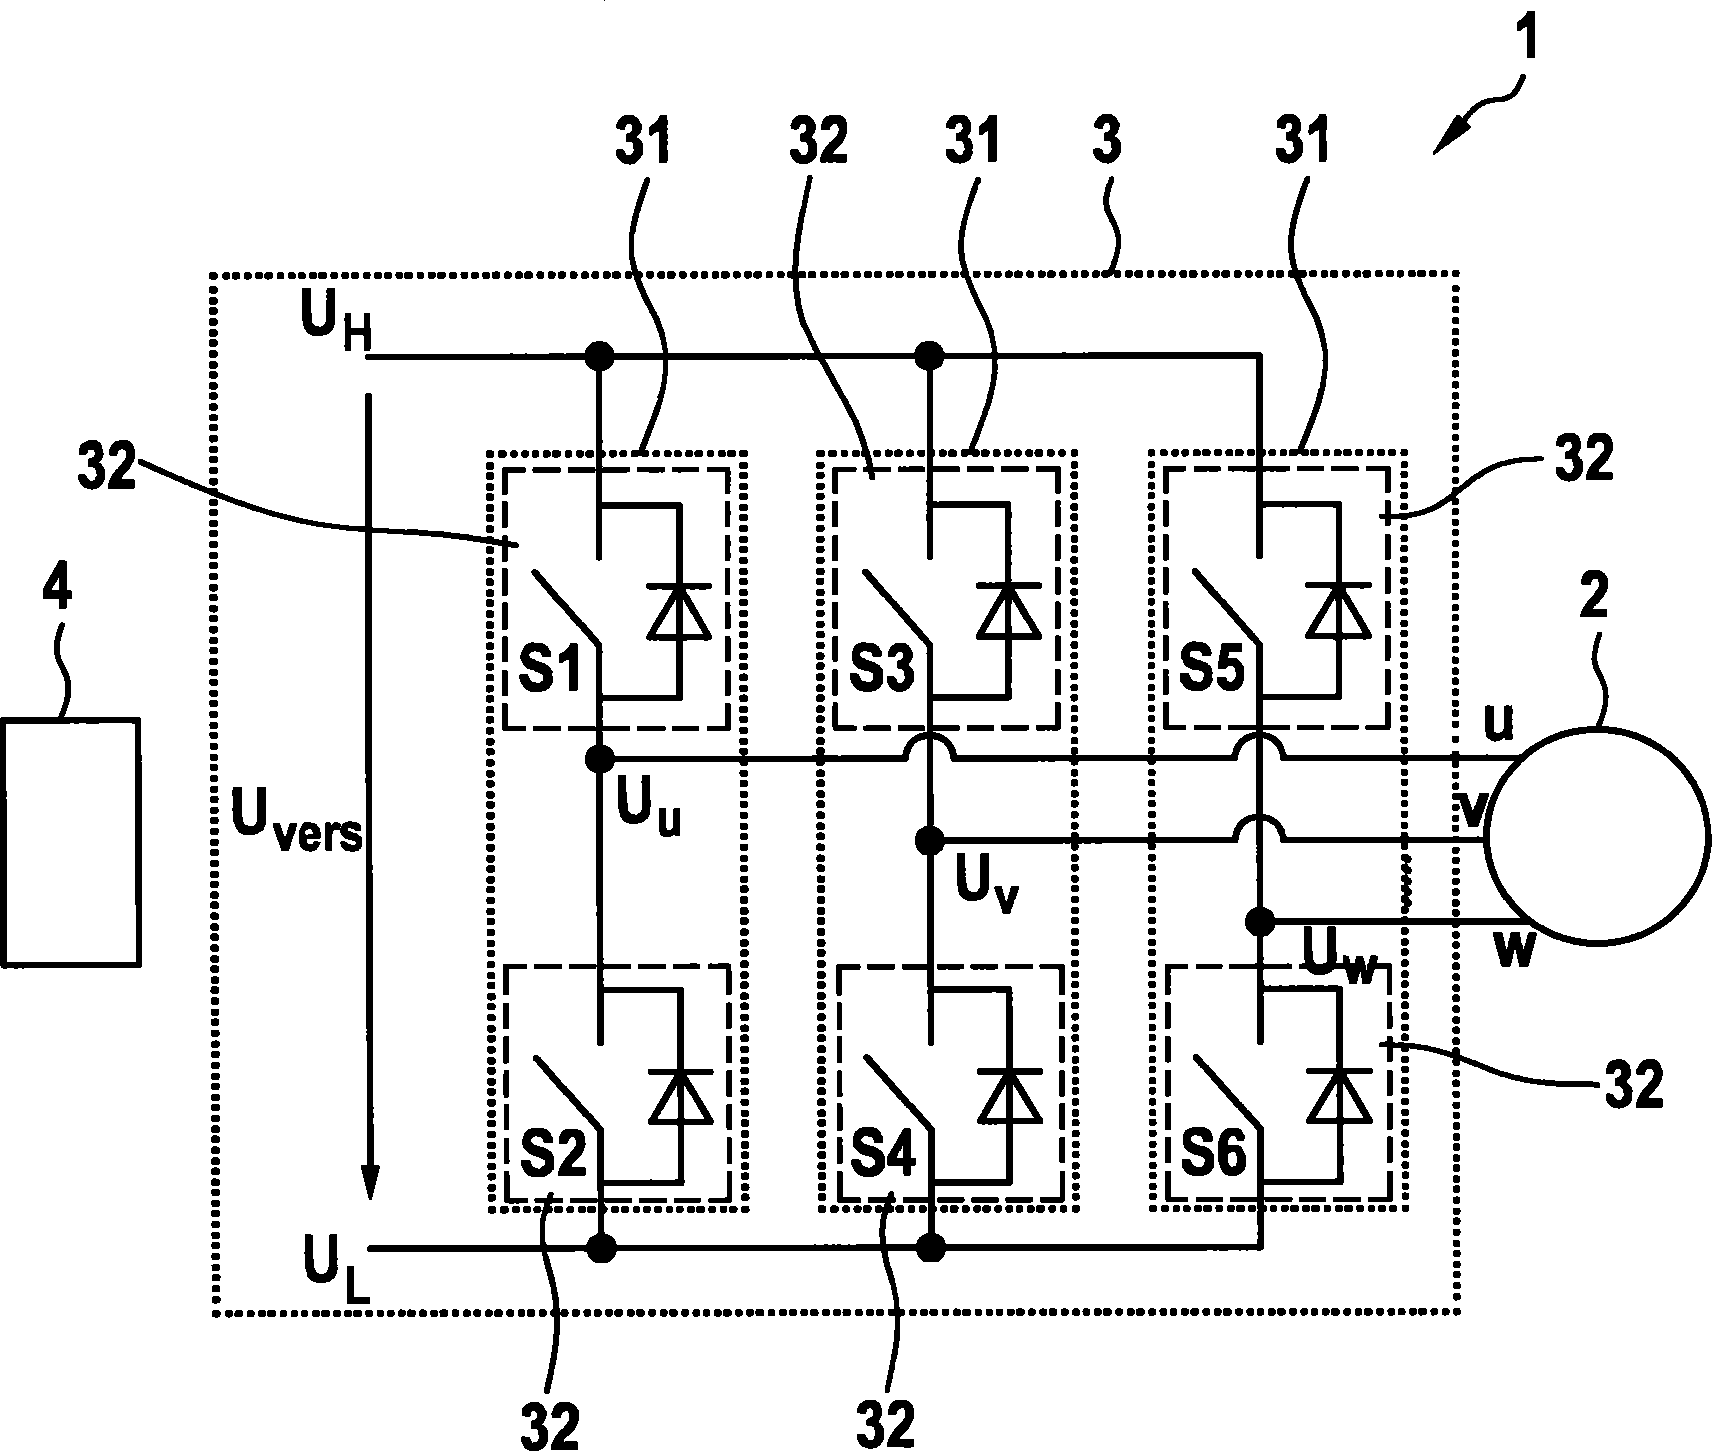 Method and apparatus for operating an electronically commutated electrical machine in the event of a fault